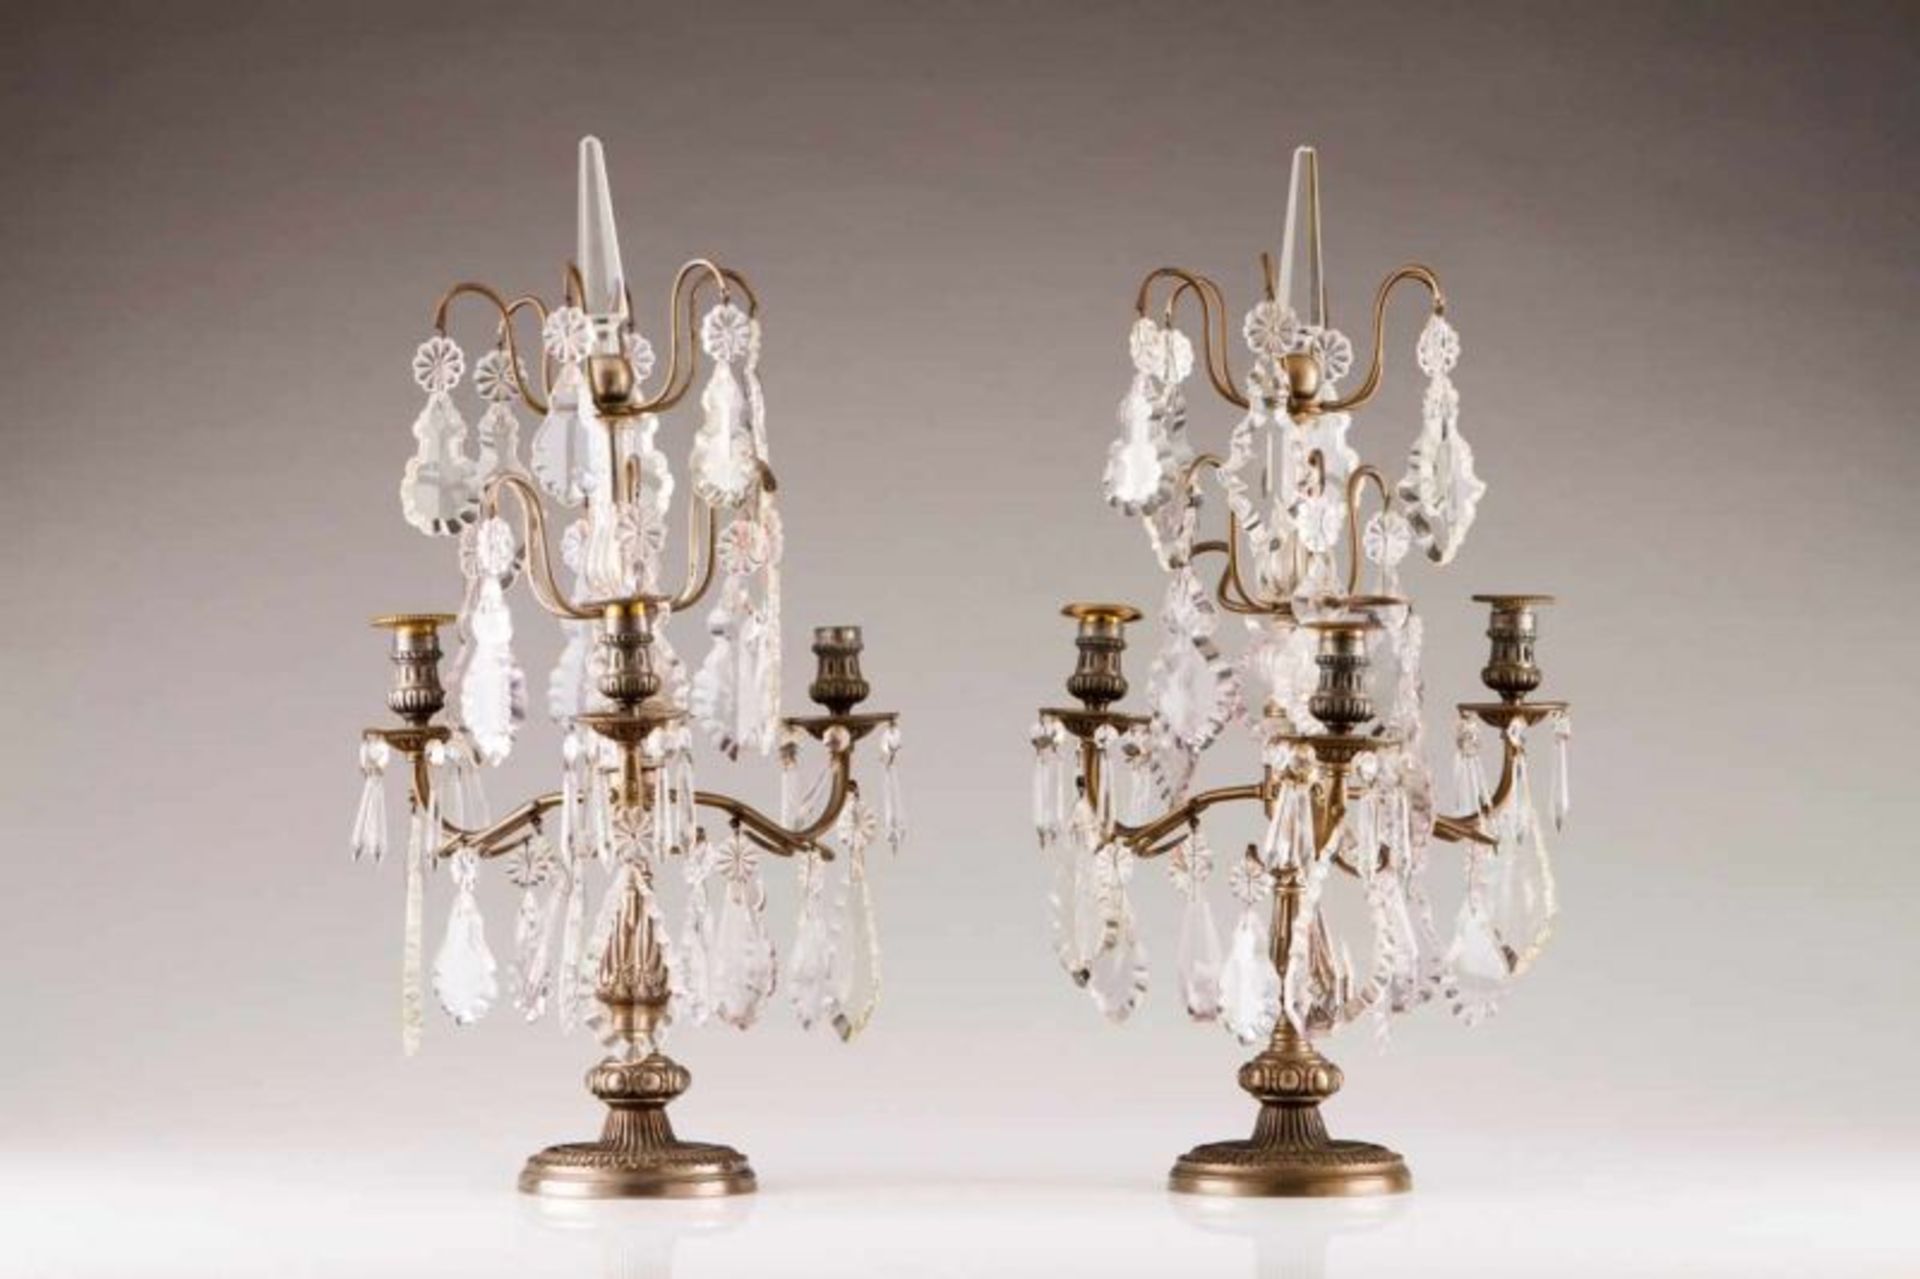 A pair of girandoles Gilt metal witg cut-glass pendants Europe, first half of the 20th century (